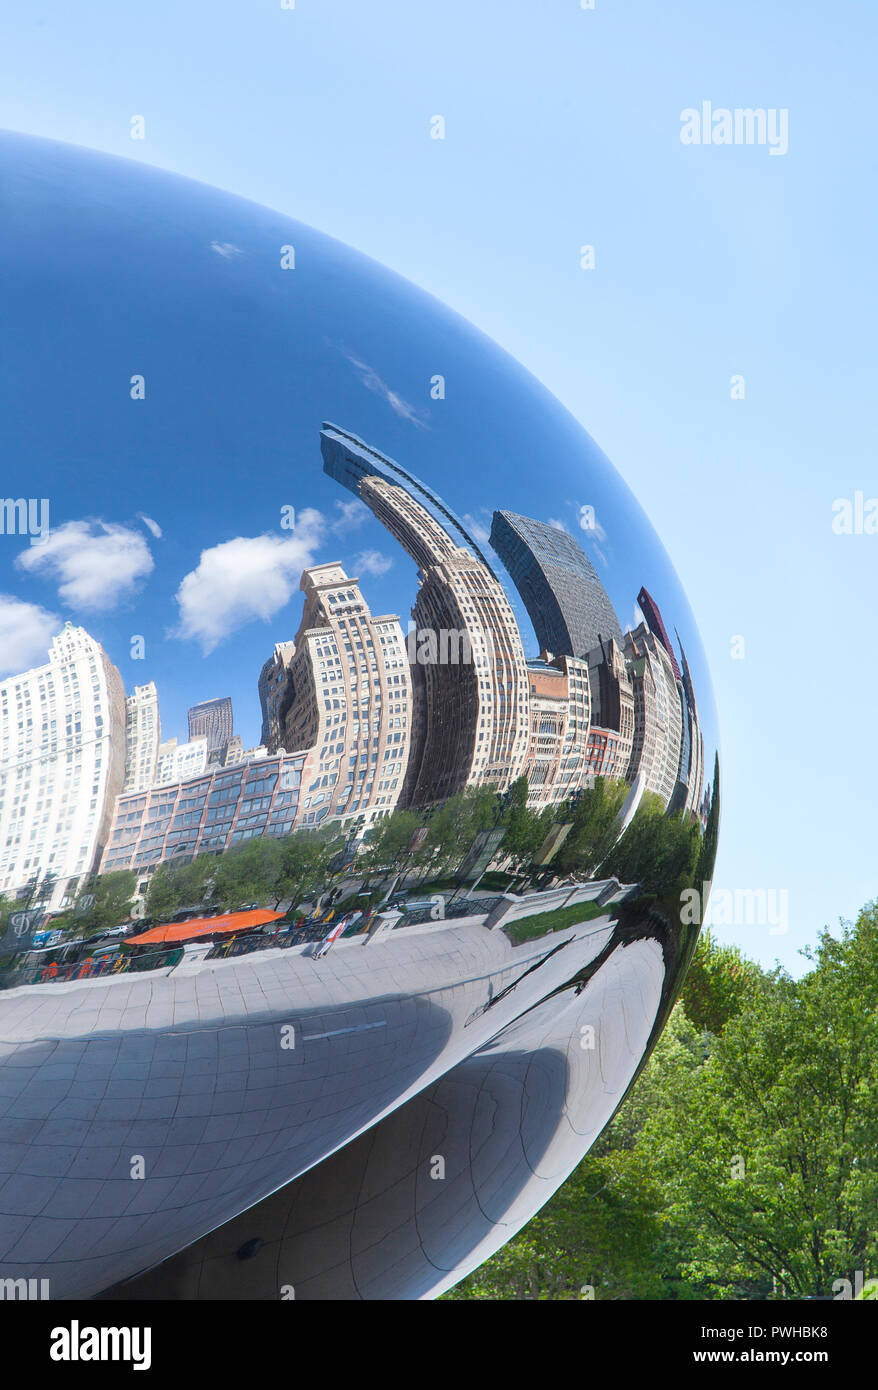 Downtown buildings reflected in the mirror surface of The Bean sculpture in Millennium Park in Chicago, Illinois. Stock Photo